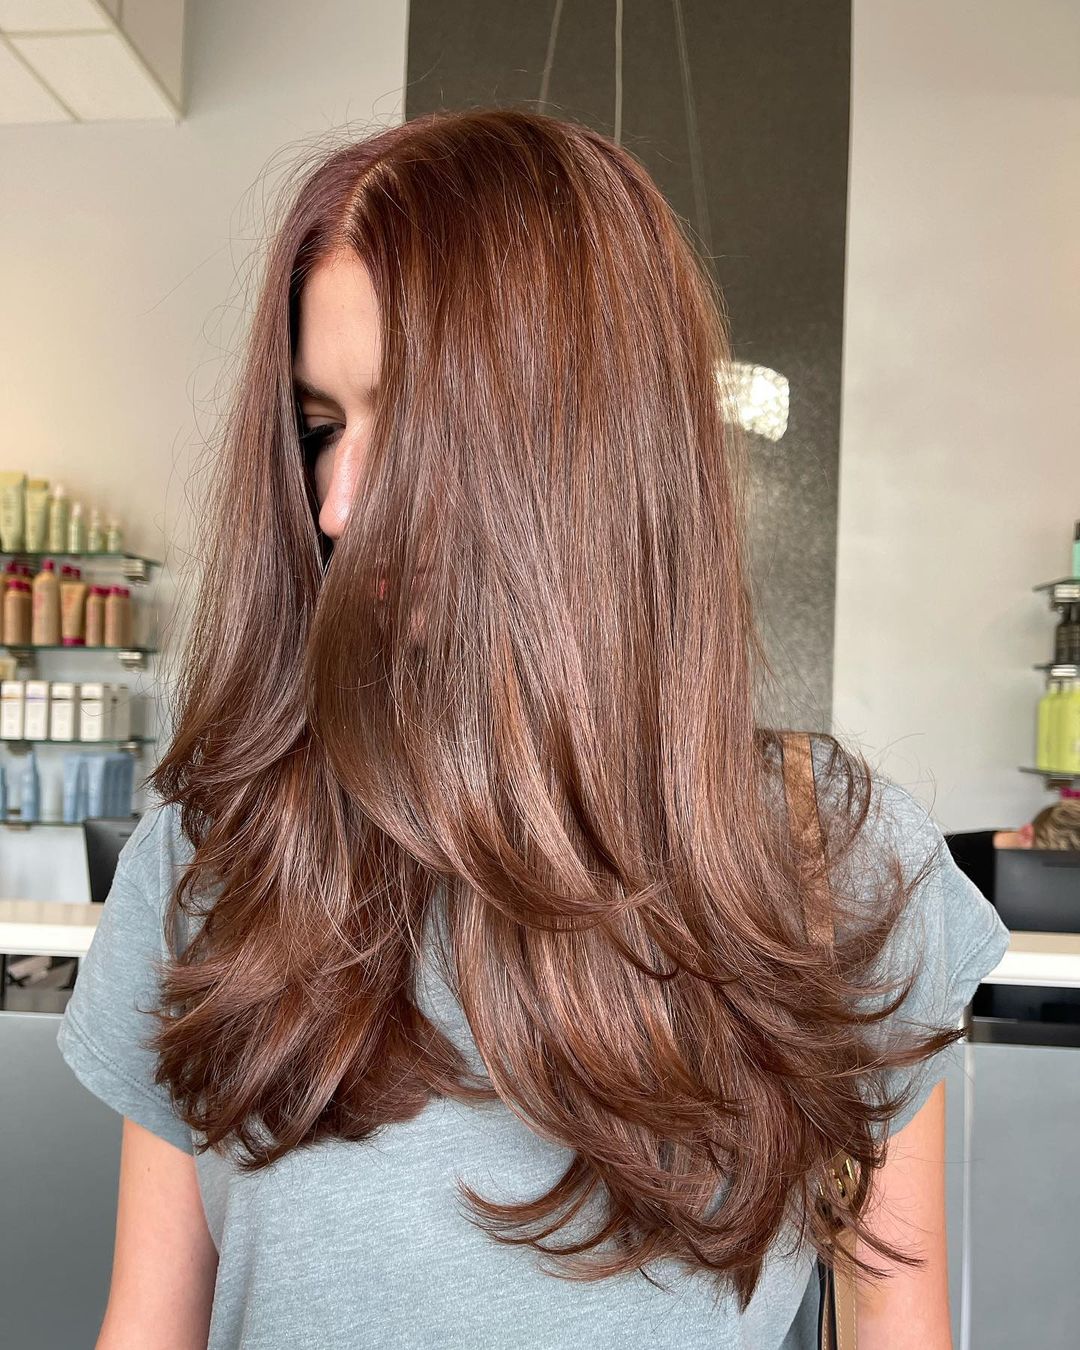 Chestnut Red-Brown Hair Color with Face-Framing Layers